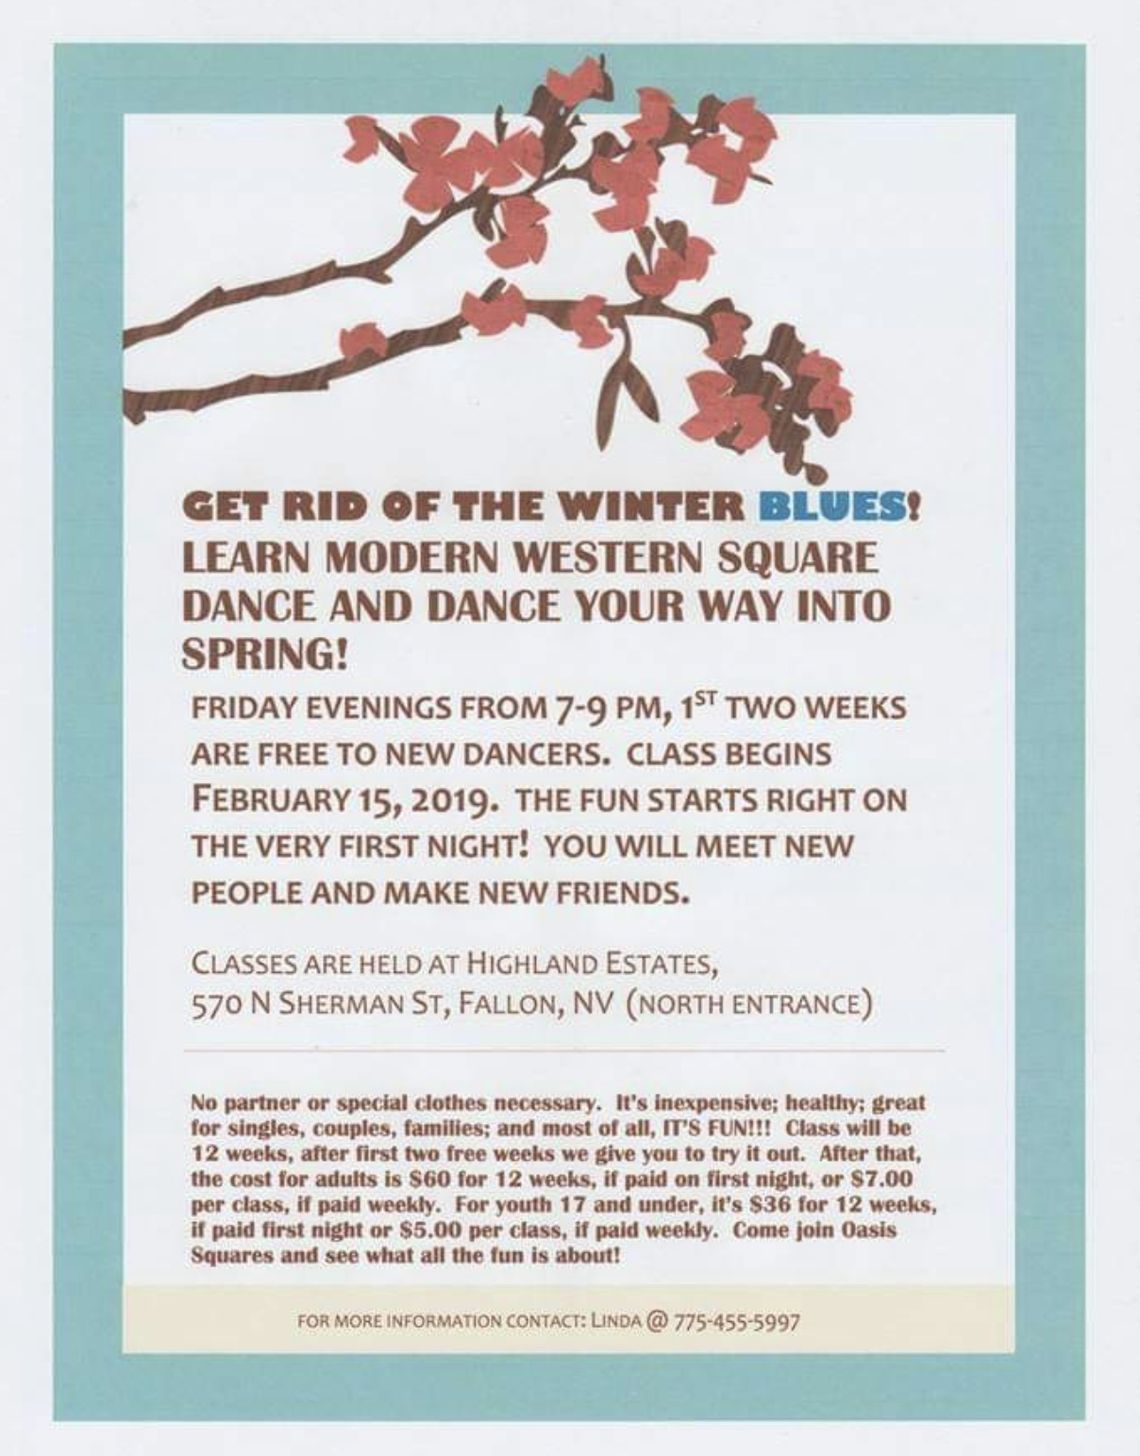 Learn Modern Western Square Dance on Friday Nights